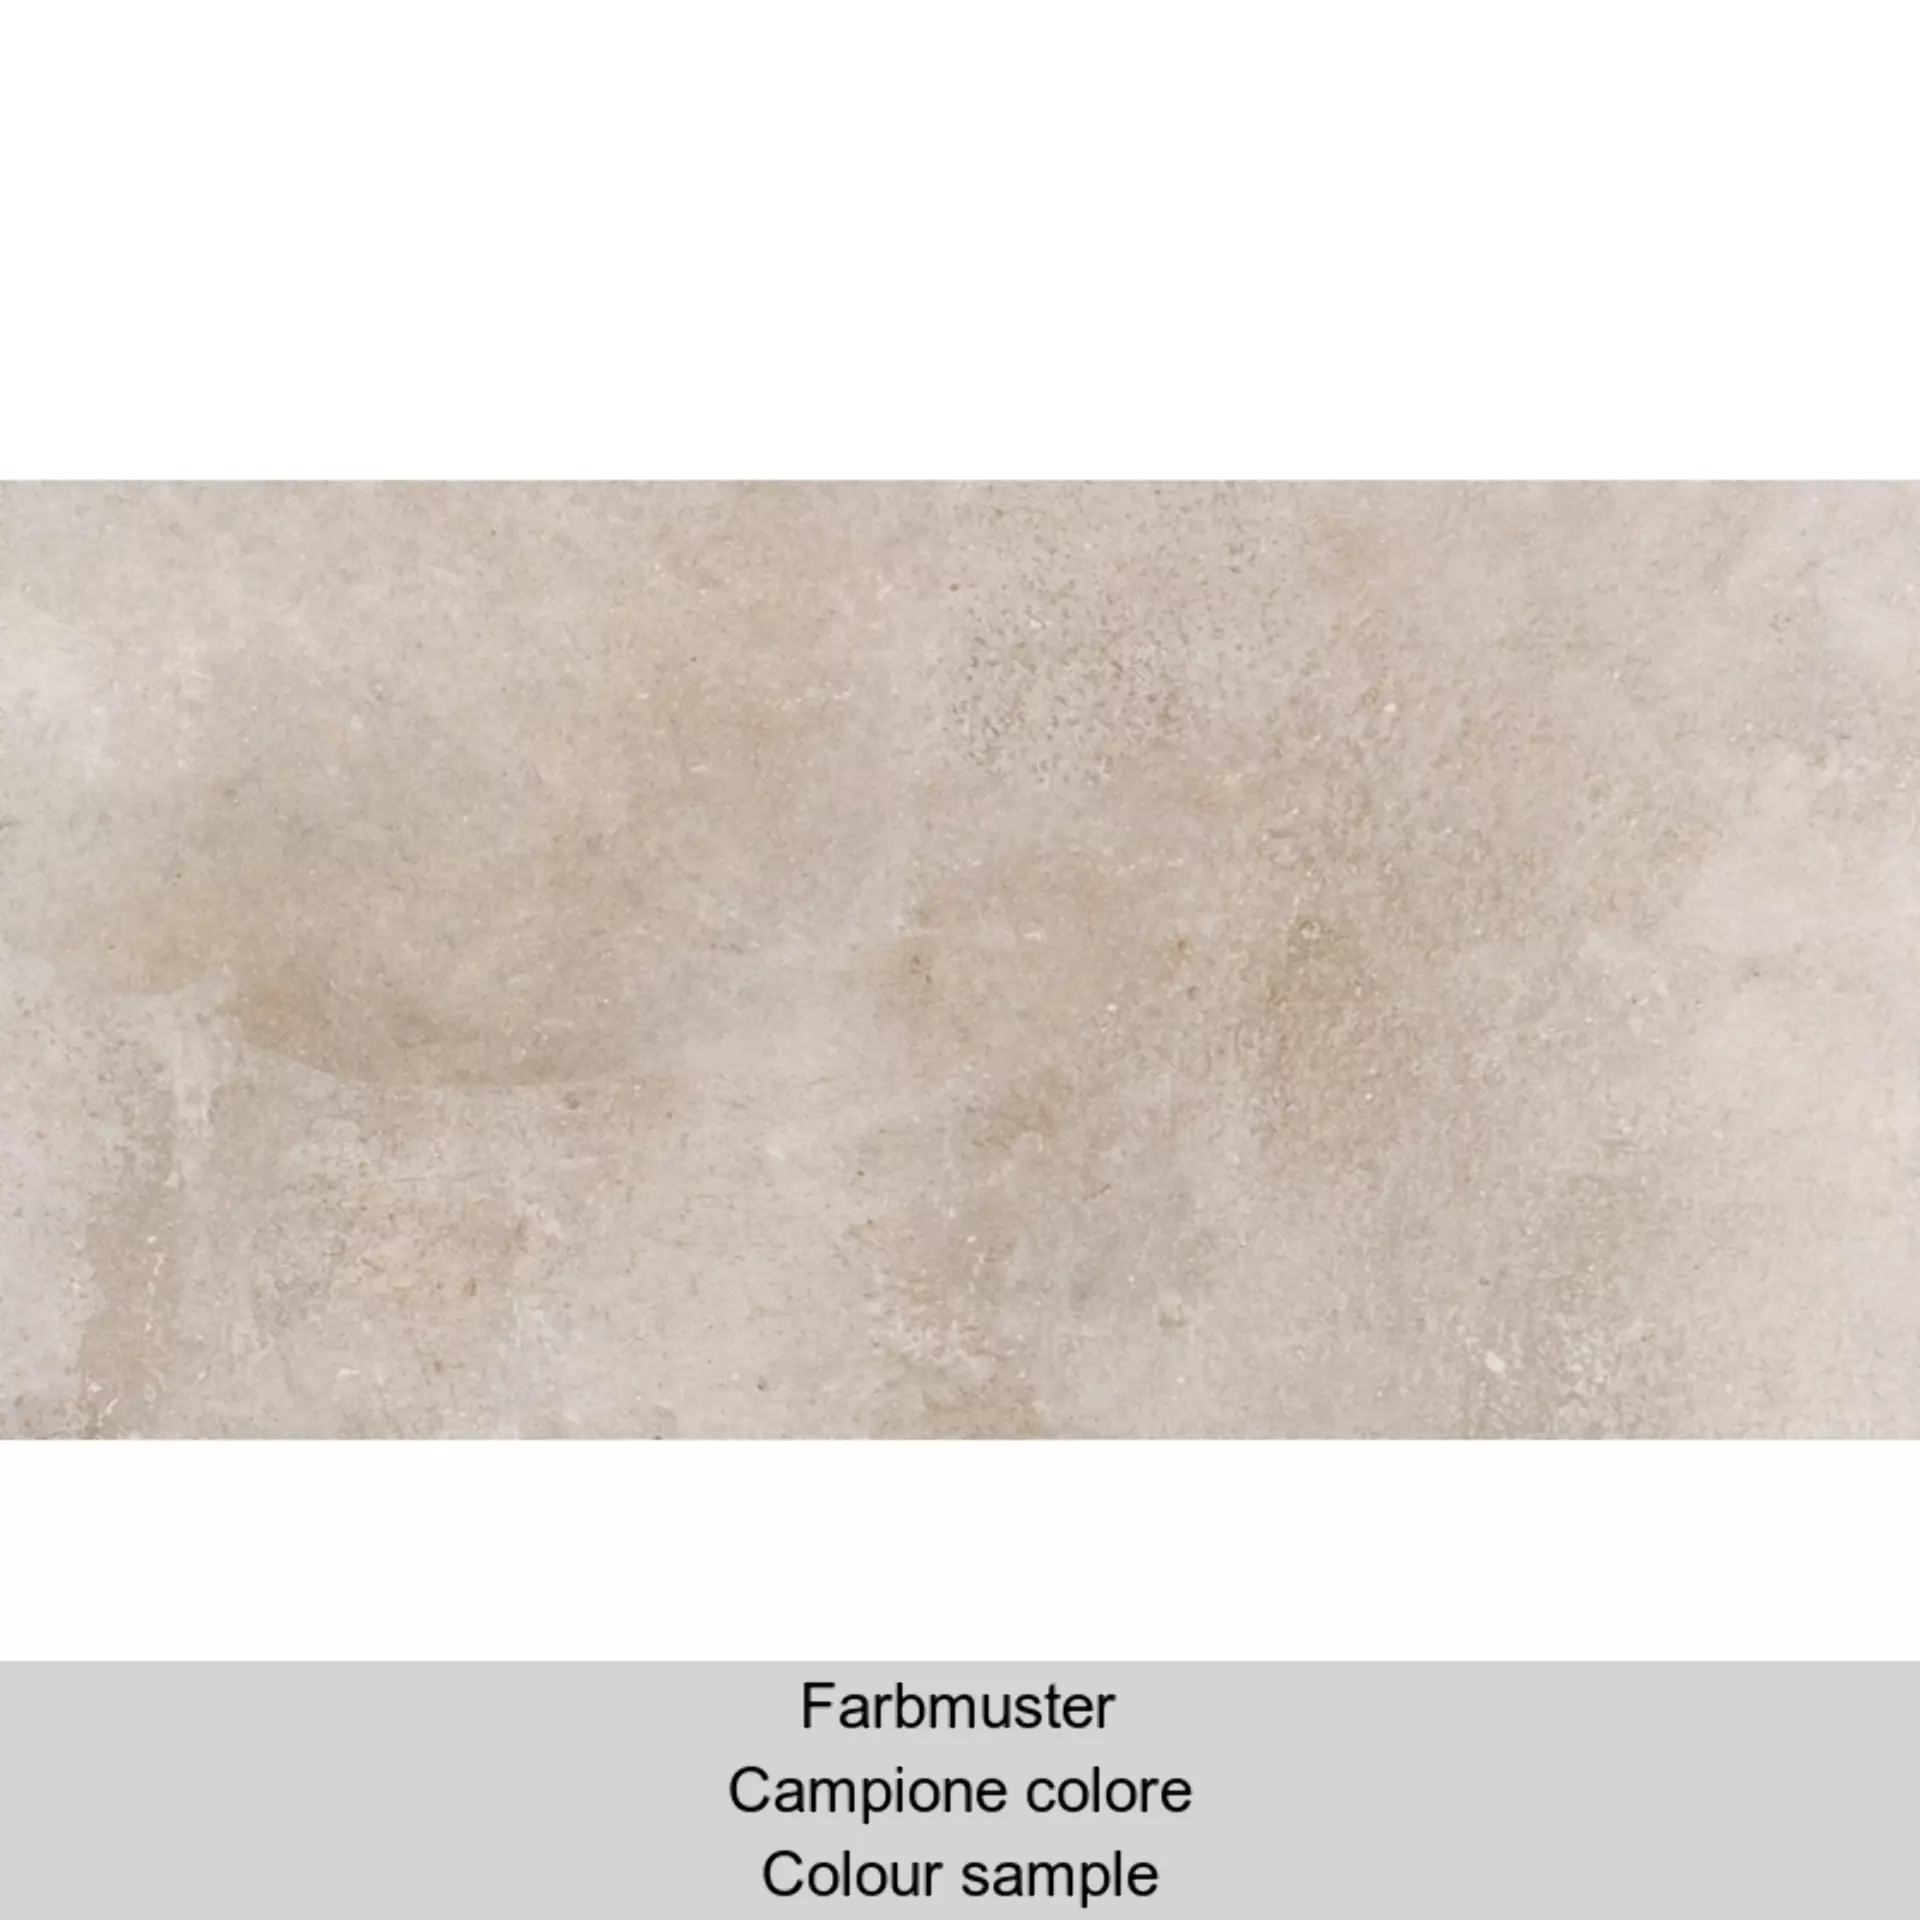 Supergres Story Sgs Ivory Naturale – Matt SIV9 45x90cm rectified 9mm